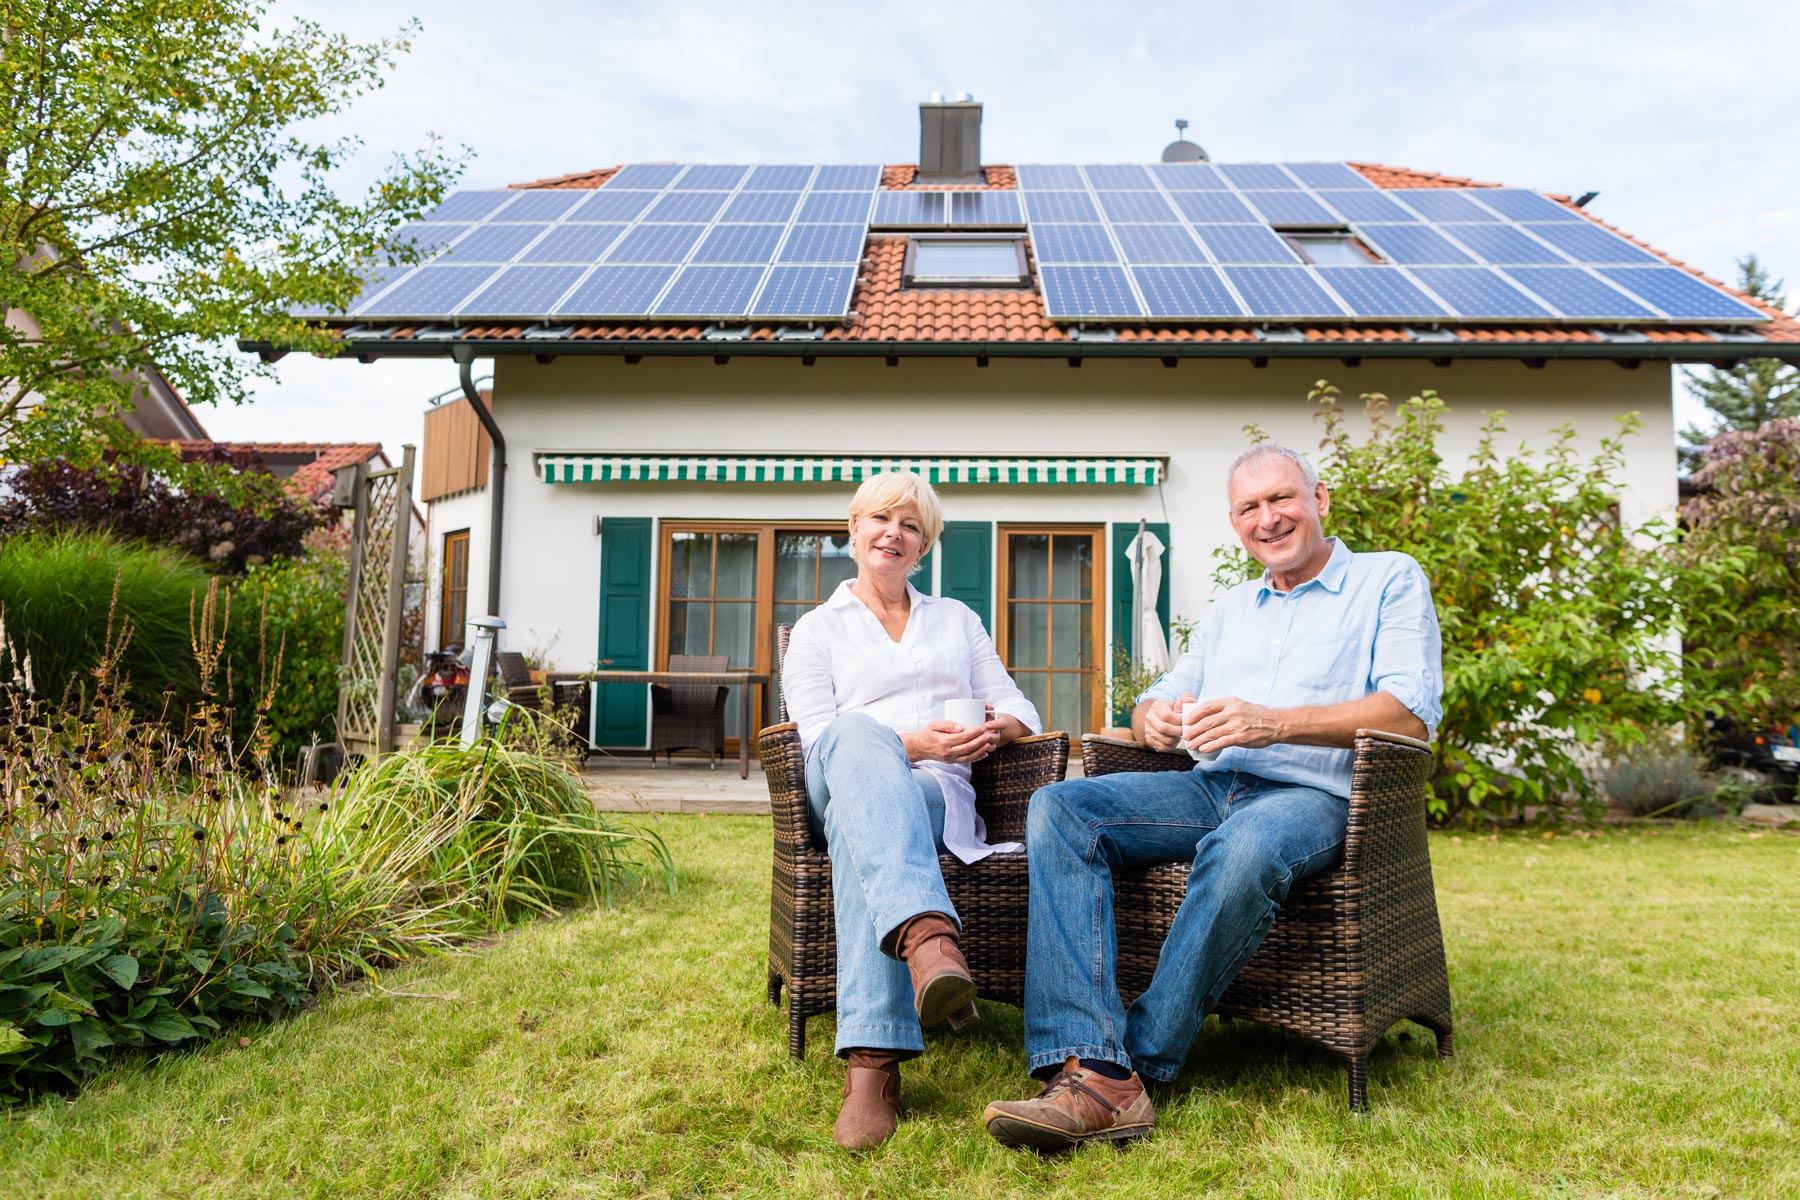 Image of homeowners and solar panels